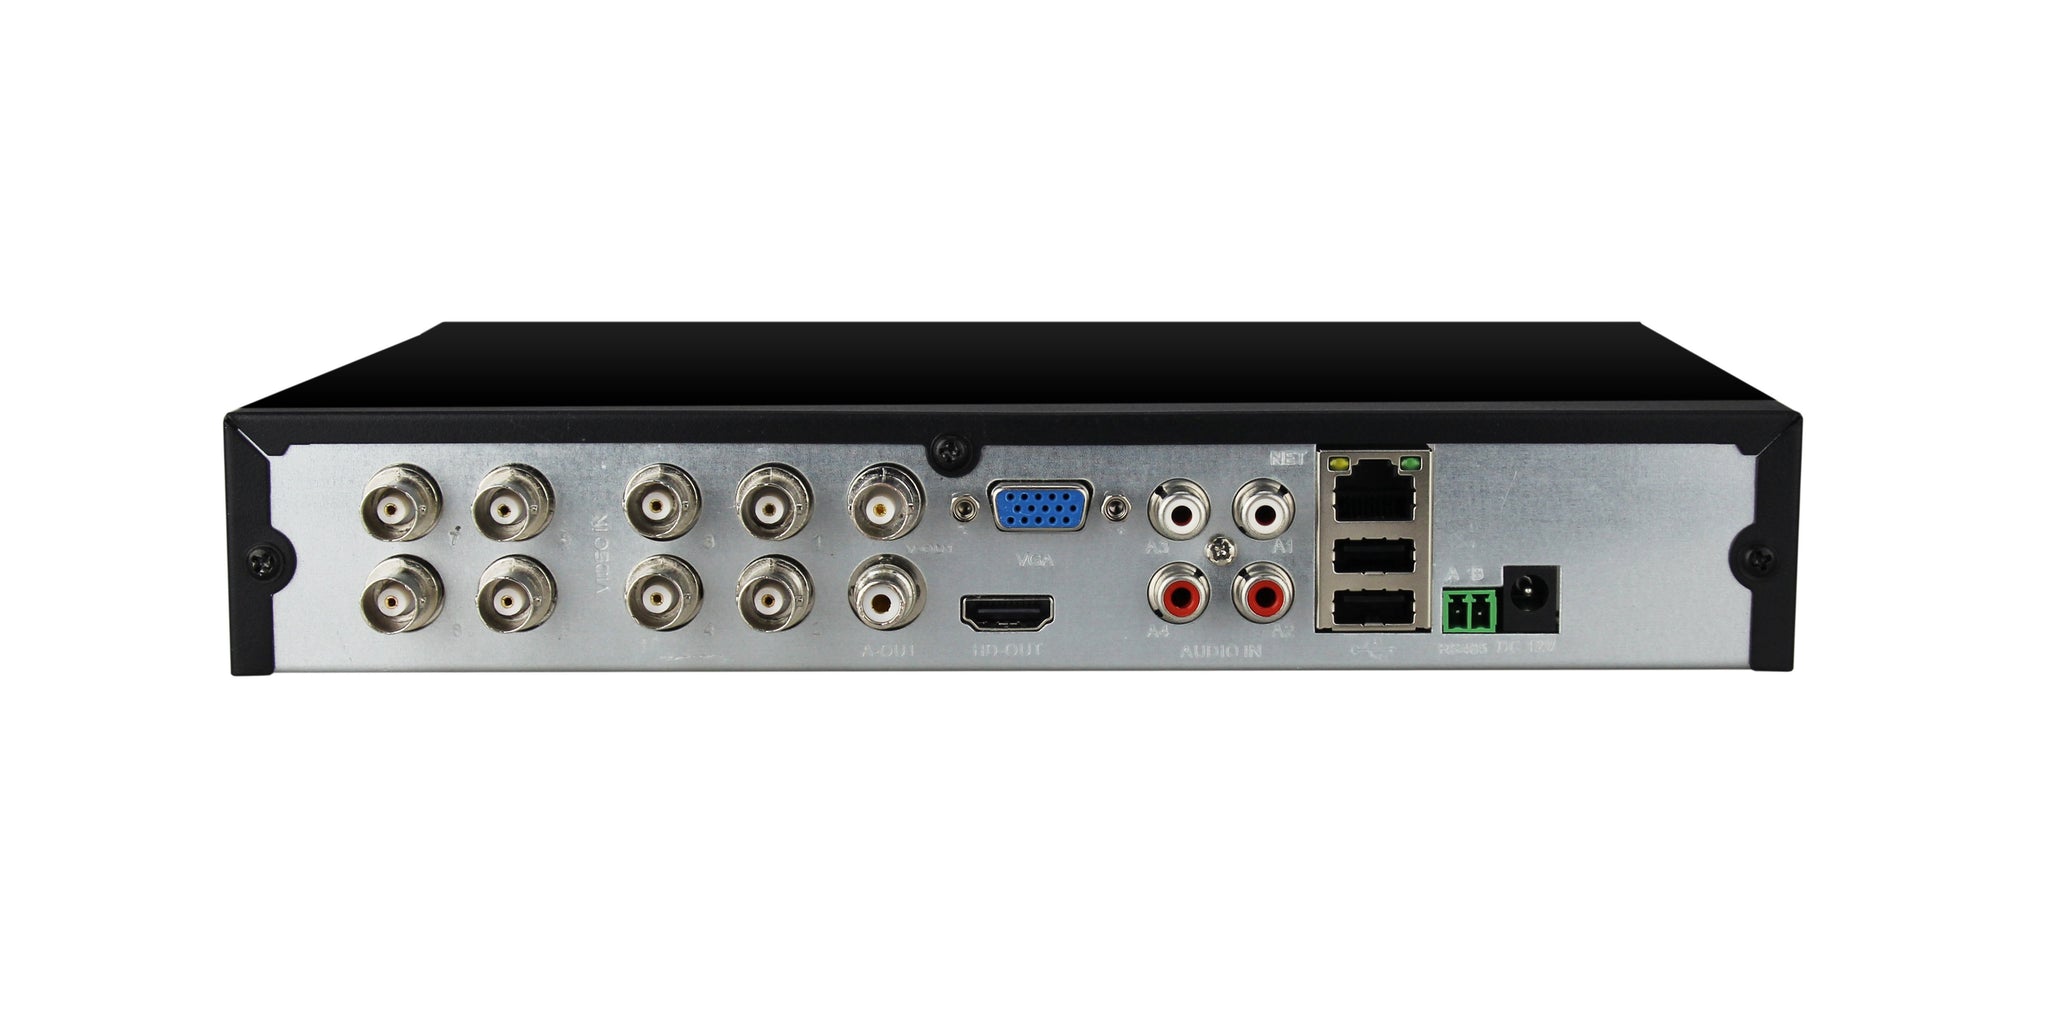 8 Channel H.265/H.265+ 5-in-1 DVR